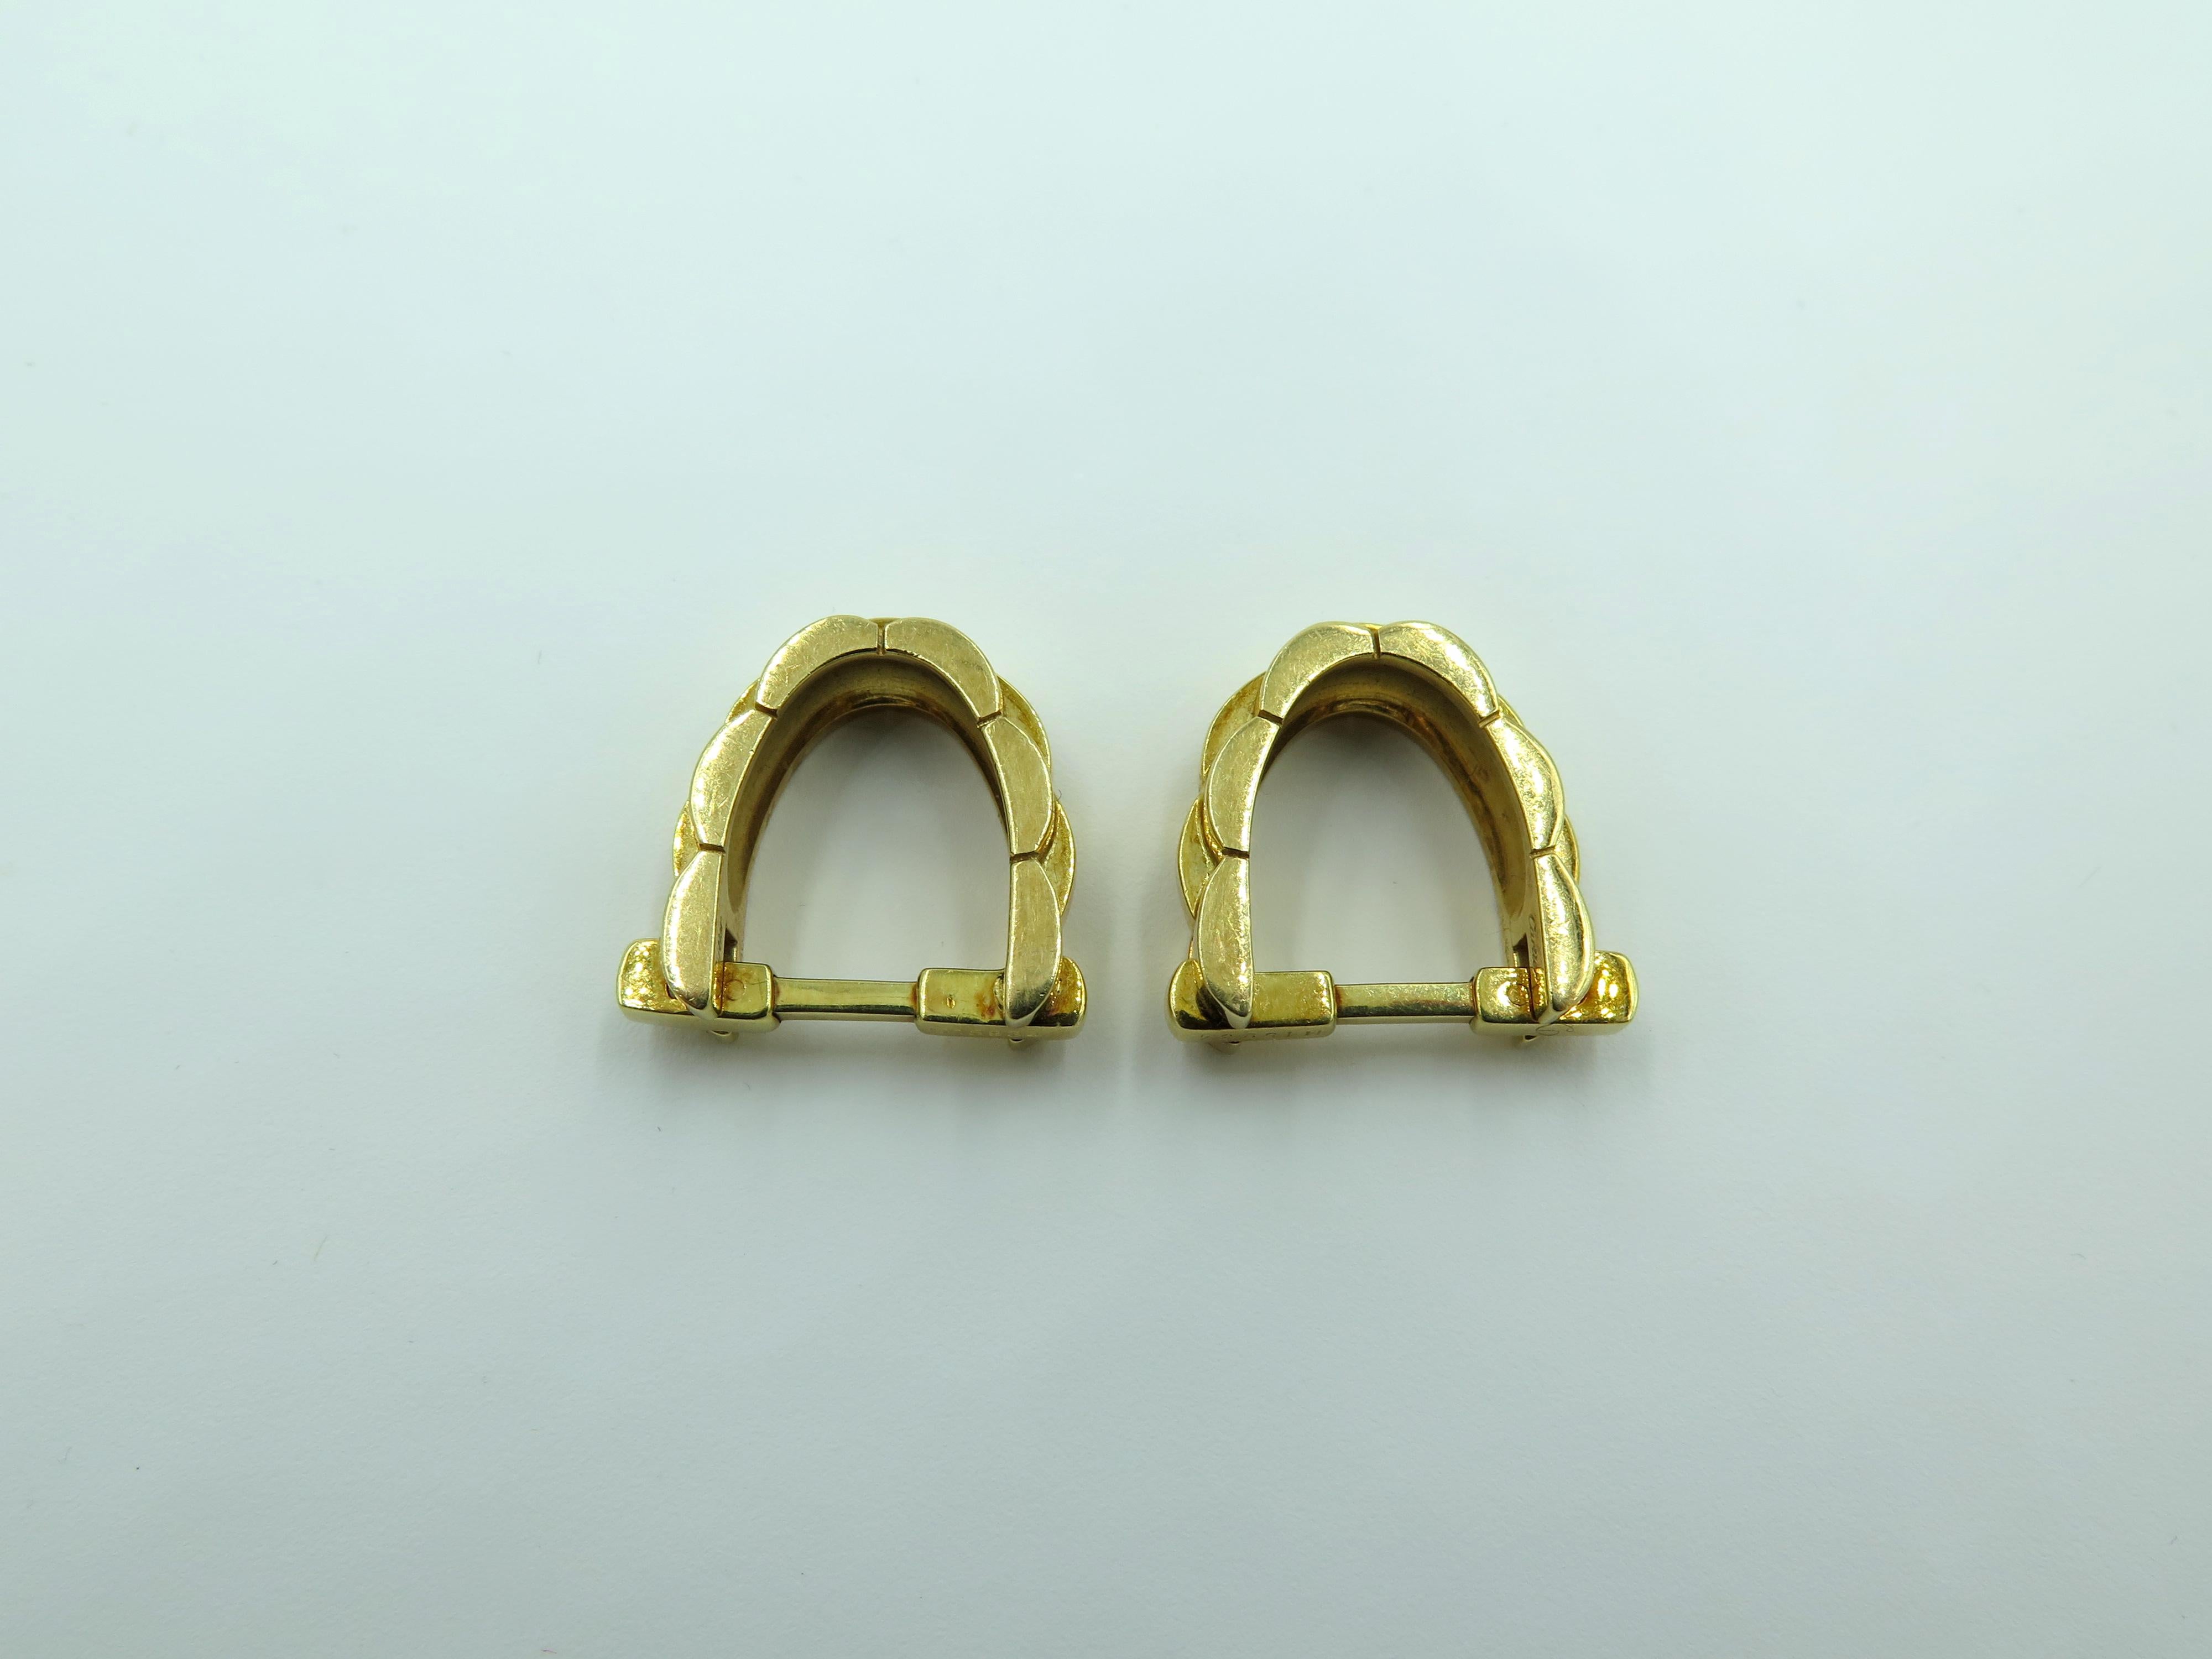 A pair of 18 karat yellow gold cufflinks.  Cartier.  From the Panthere collection. Of  stirrup design. Length is approximately 3/4 inches, gross weight is approximately 17.4 grams. Stamped Cartier, 750, with maker’s mark. numbered M15934. 